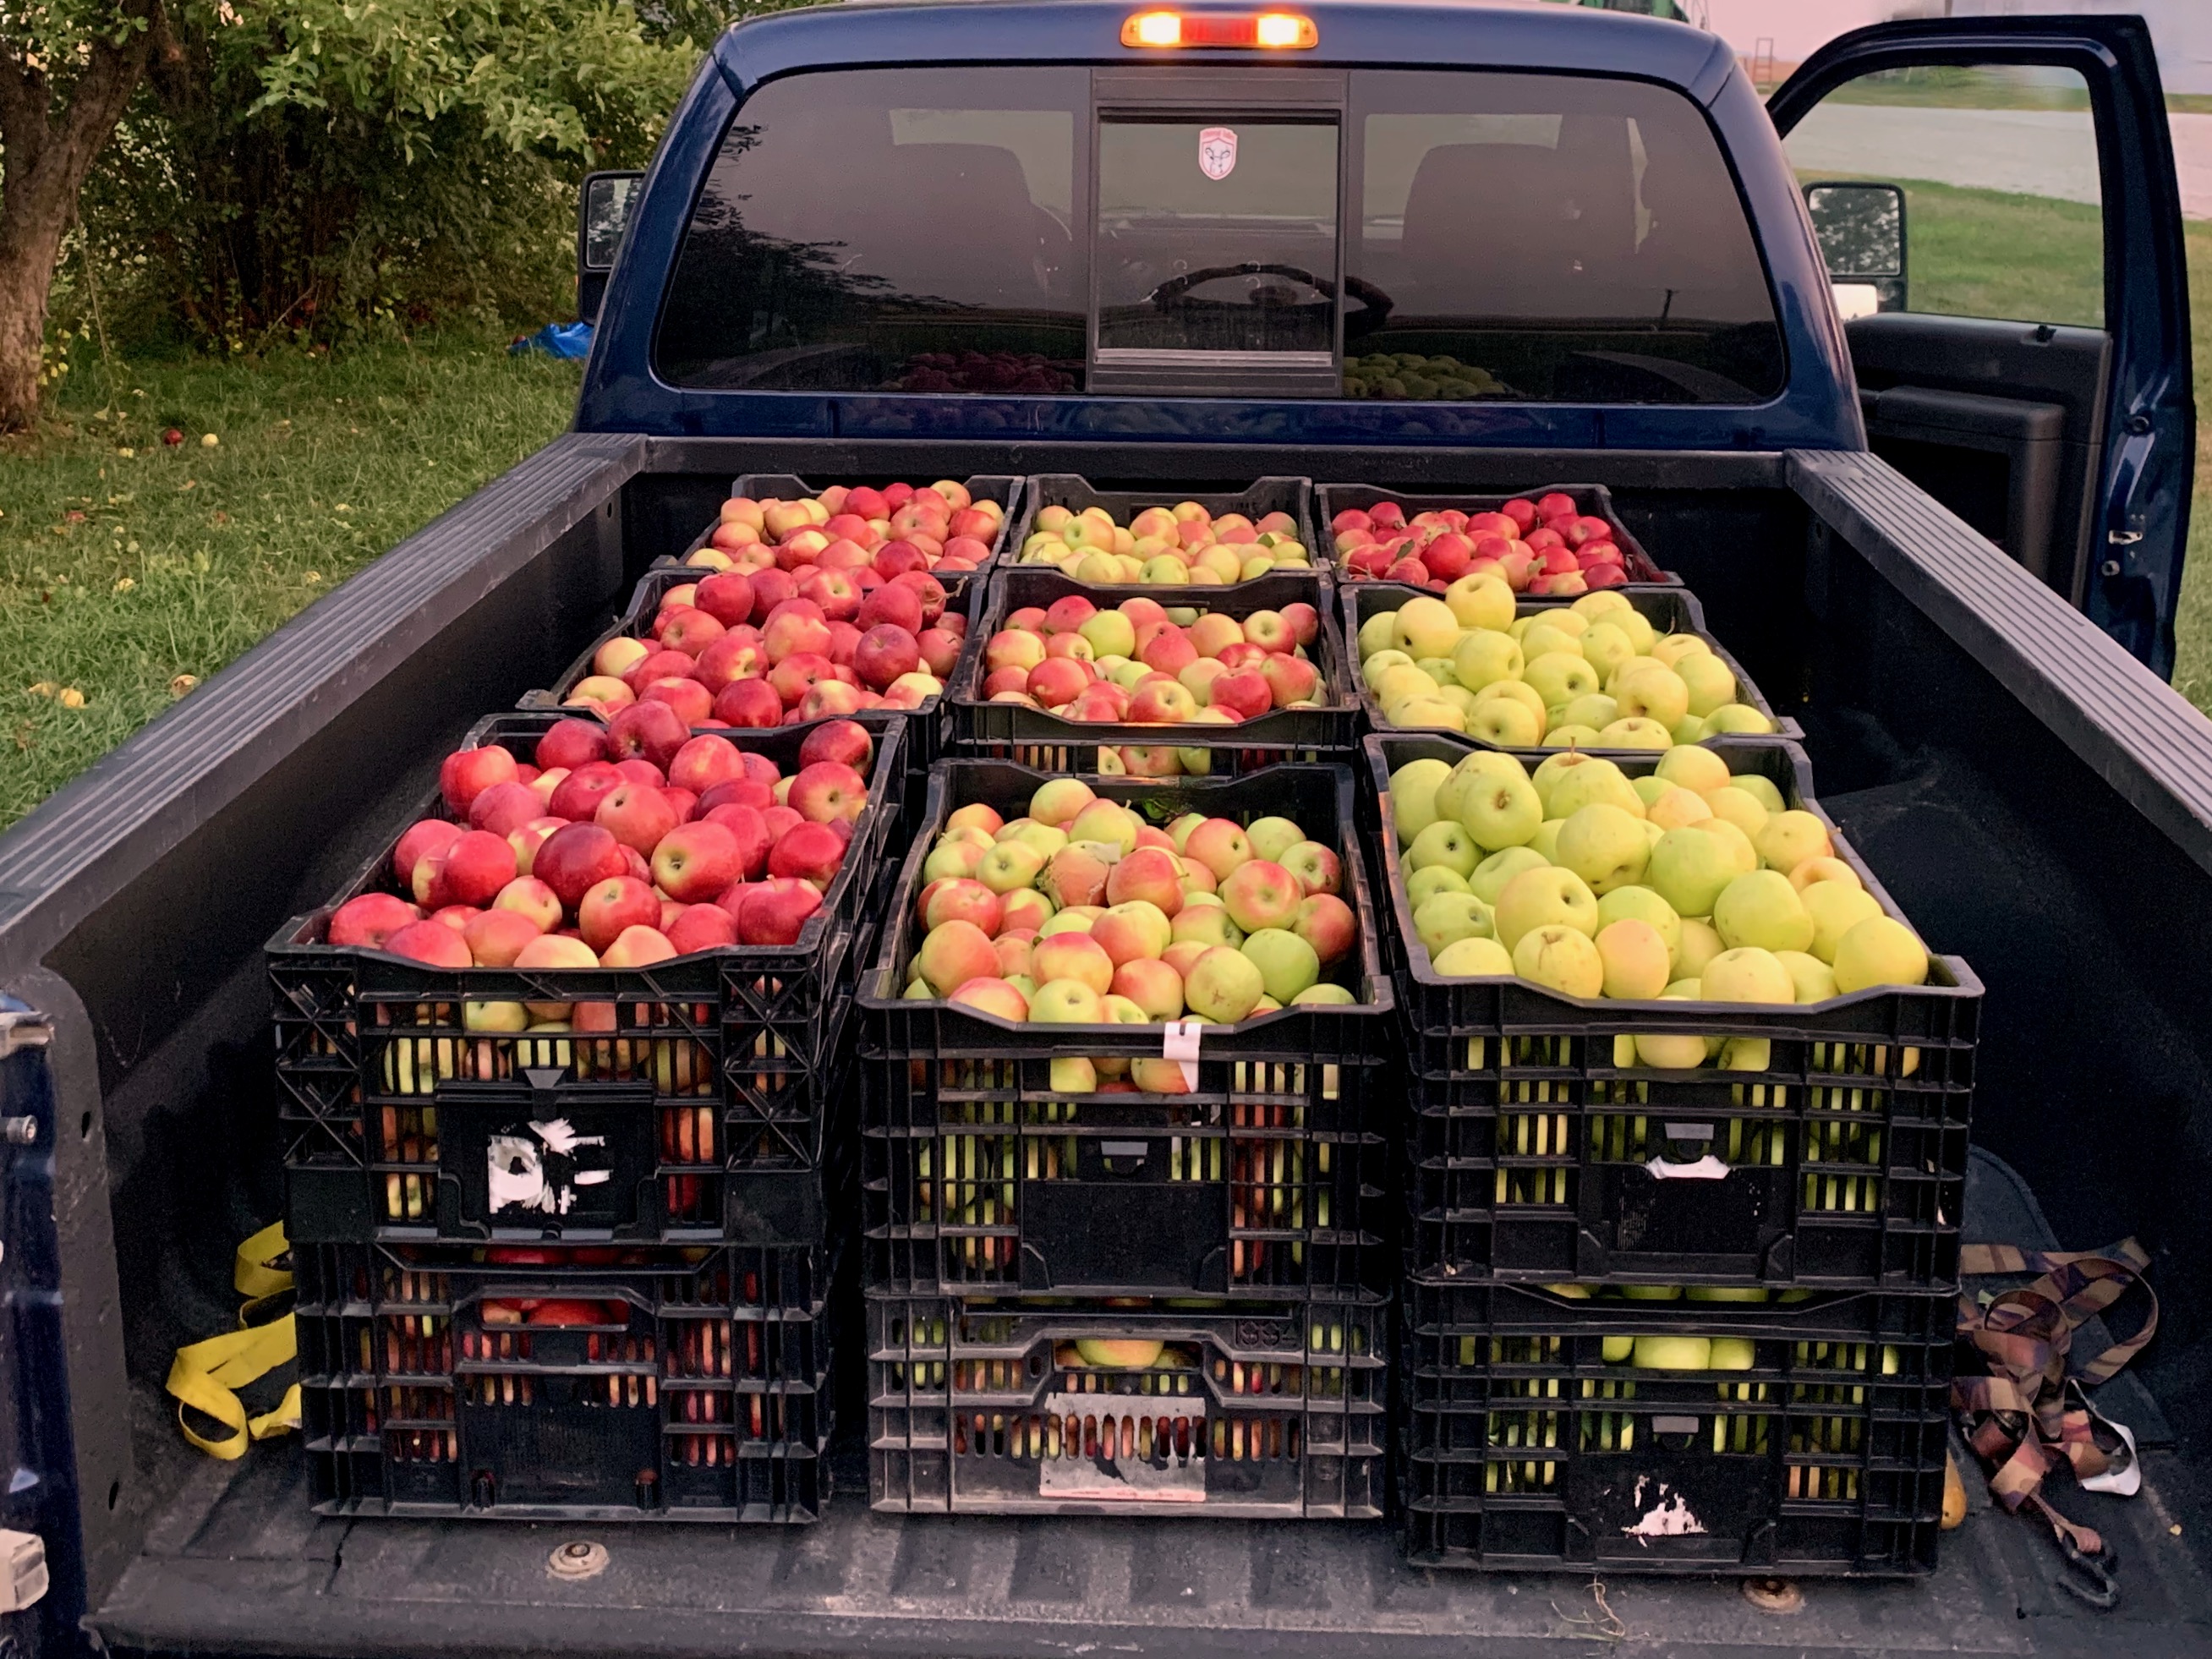 A pickup truck full of crates of red and yellow apples at harvest time.